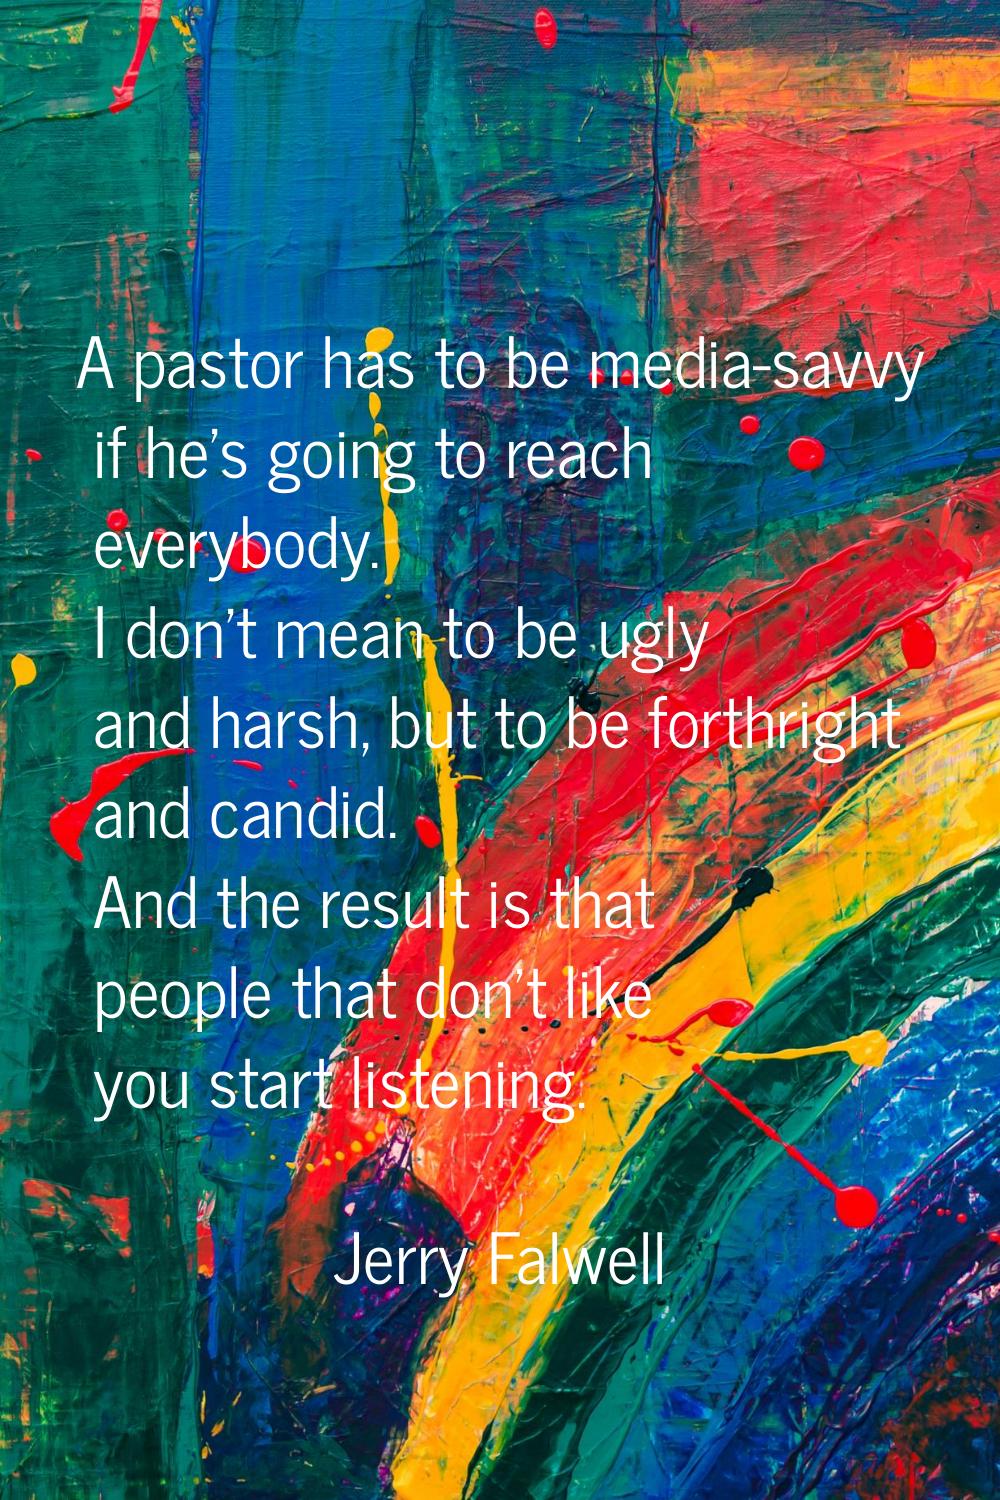 A pastor has to be media-savvy if he's going to reach everybody. I don't mean to be ugly and harsh,